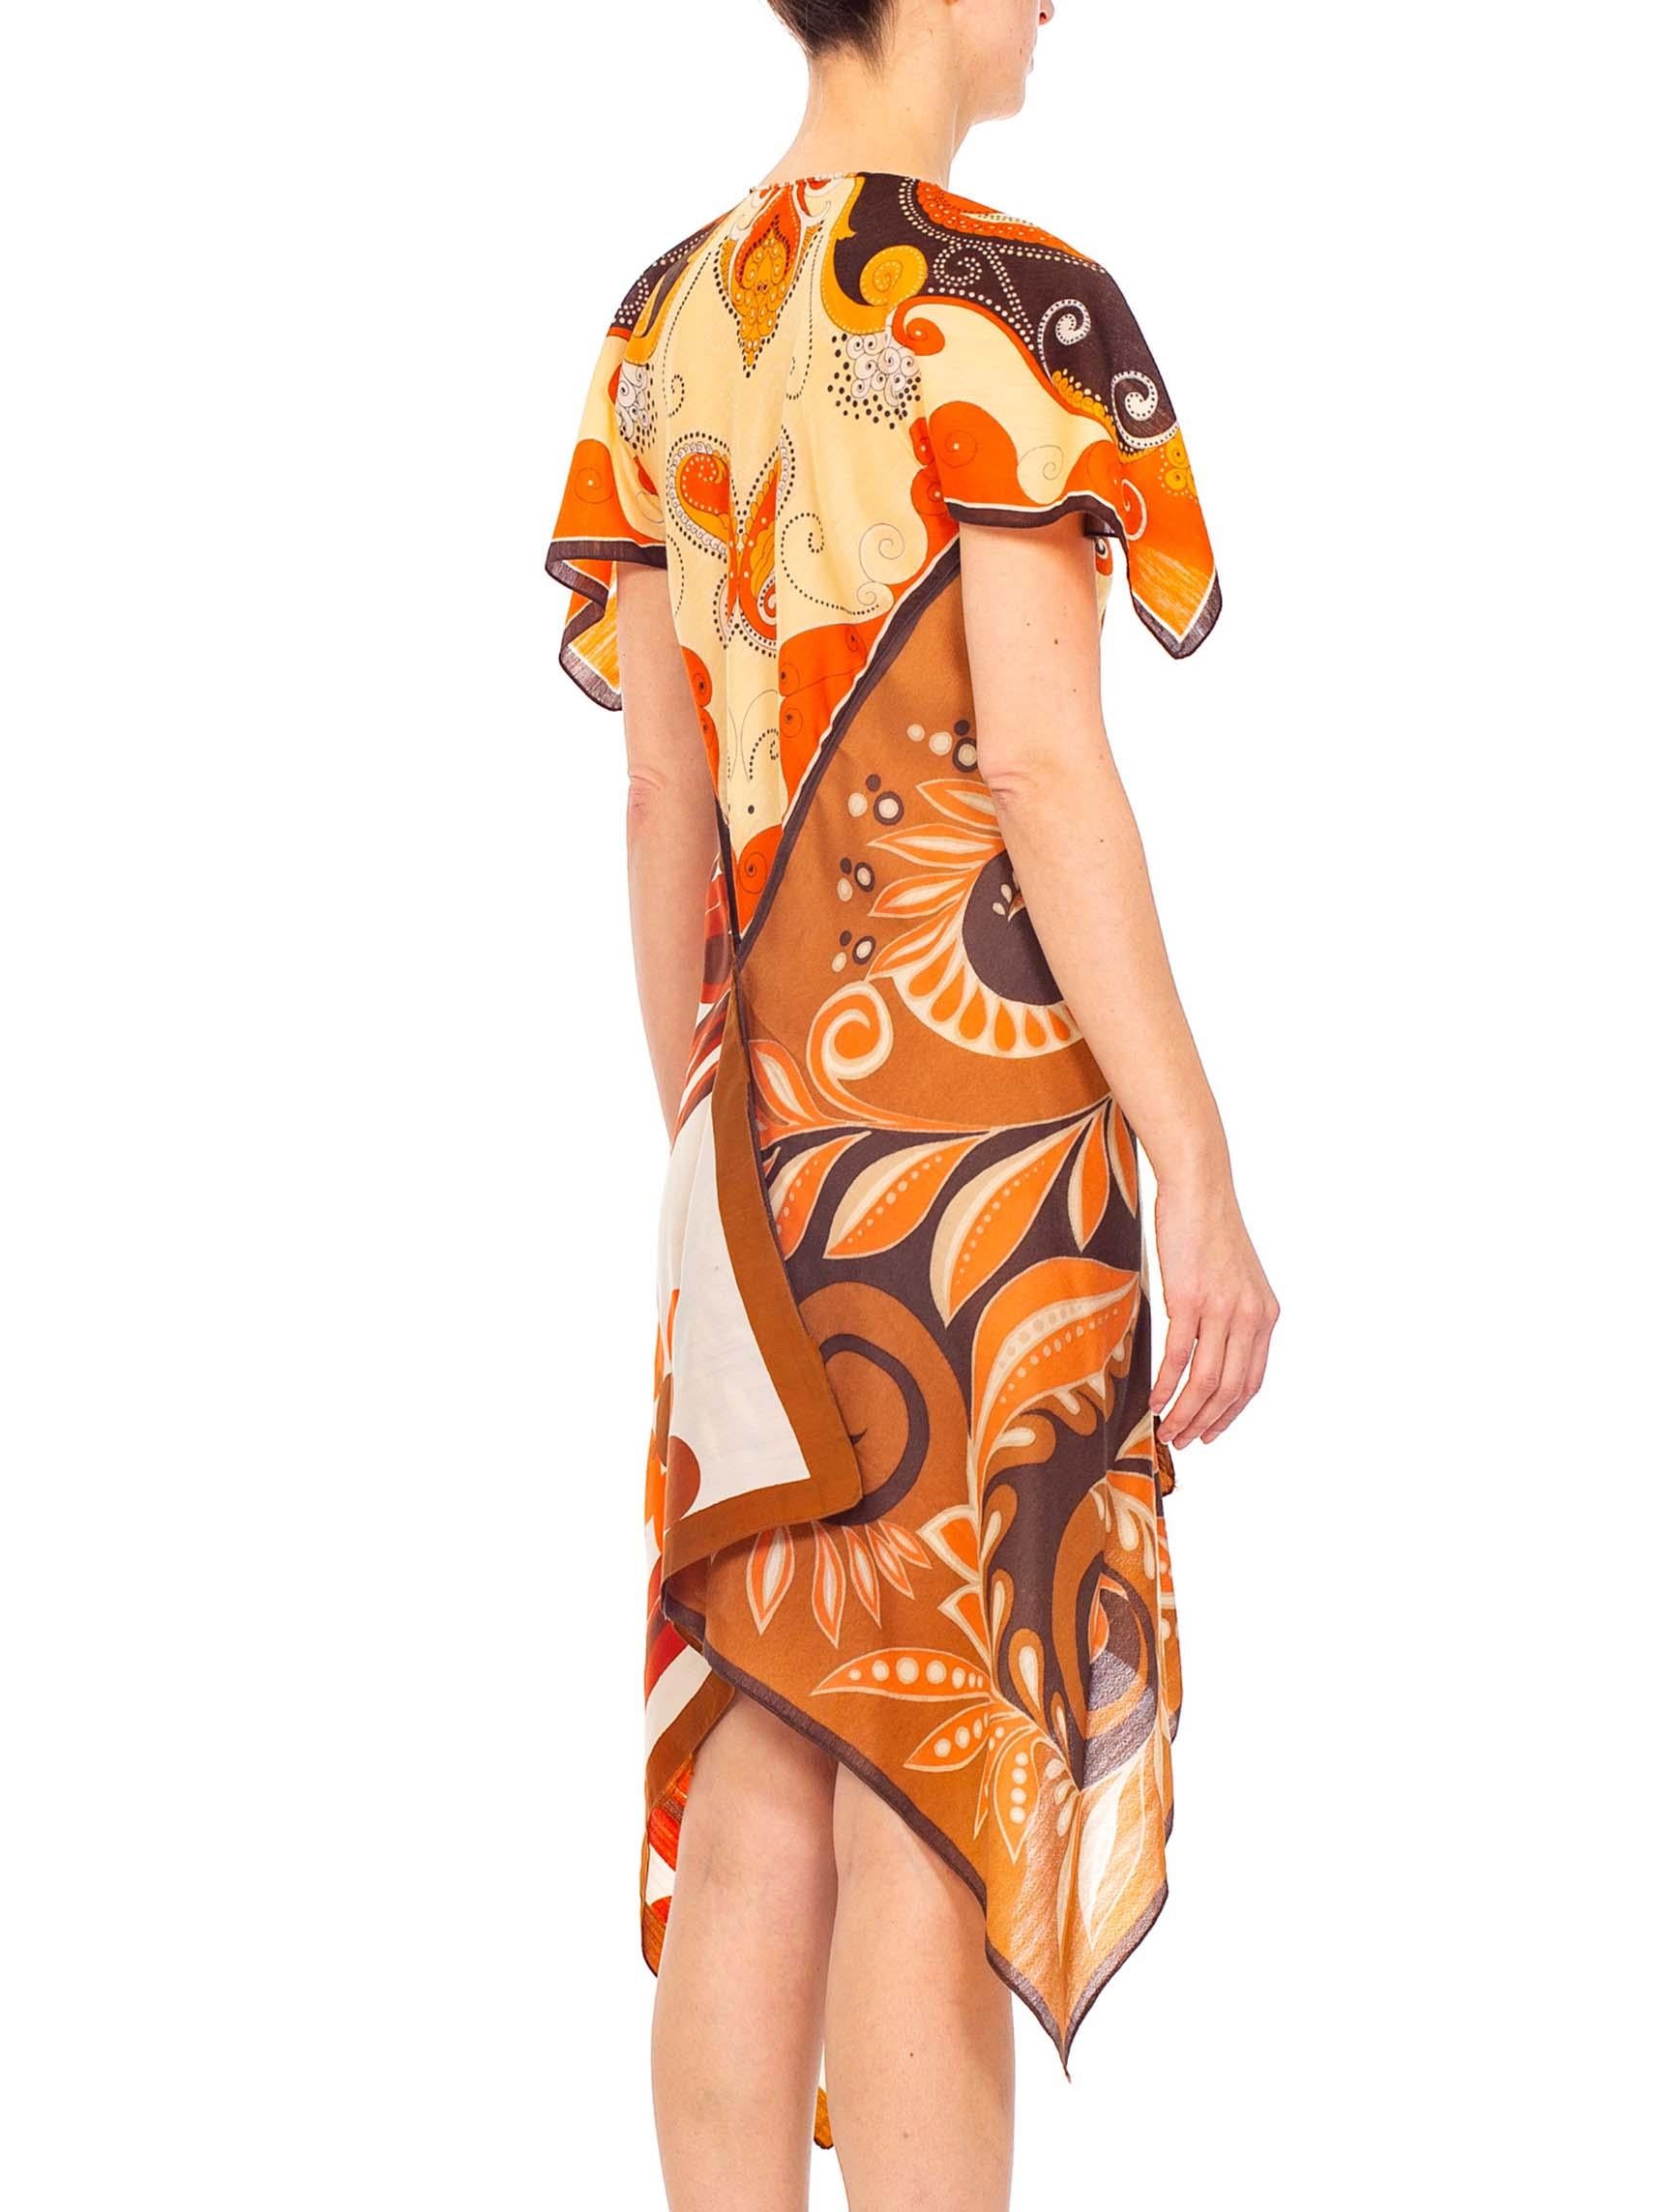 MORPHEW COLLECTION Brown & Orange Polyester Psychedelic Print Scarf Kaftan Dress For Sale 2